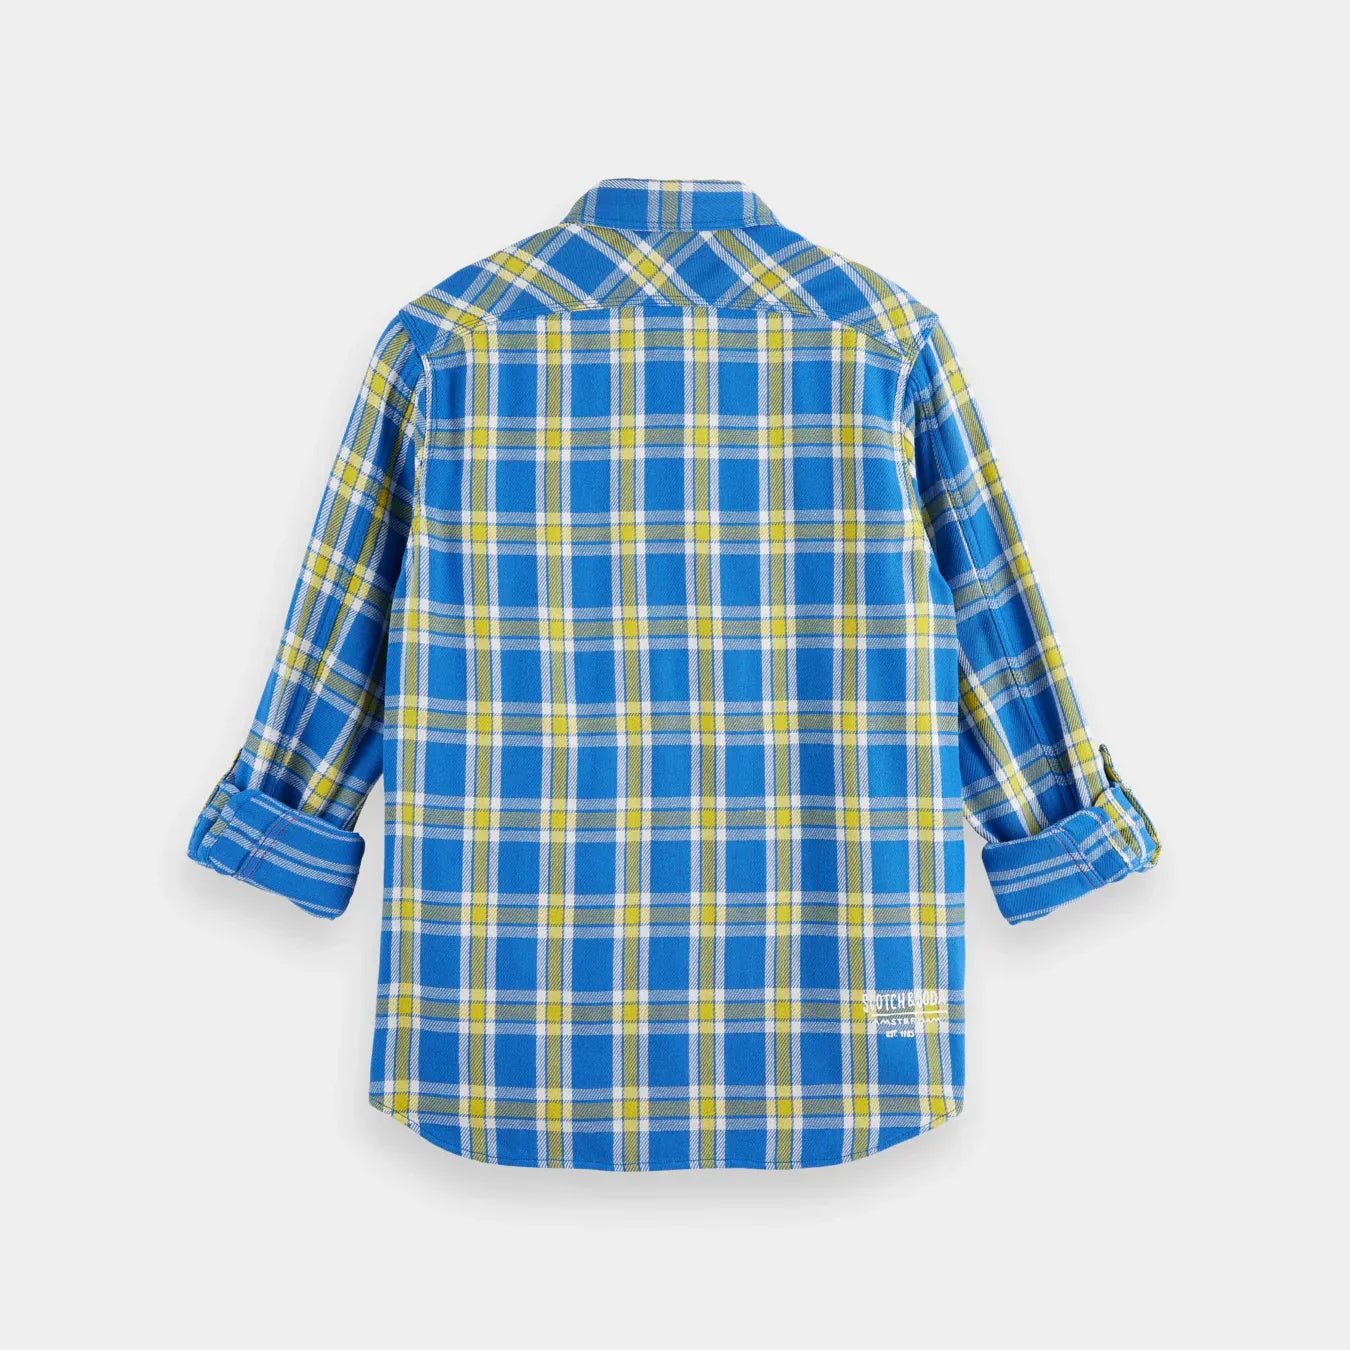 'Scotch & Soda Double-Faced Twill Check Shirt' in 'Blue/Yellow Check' colour